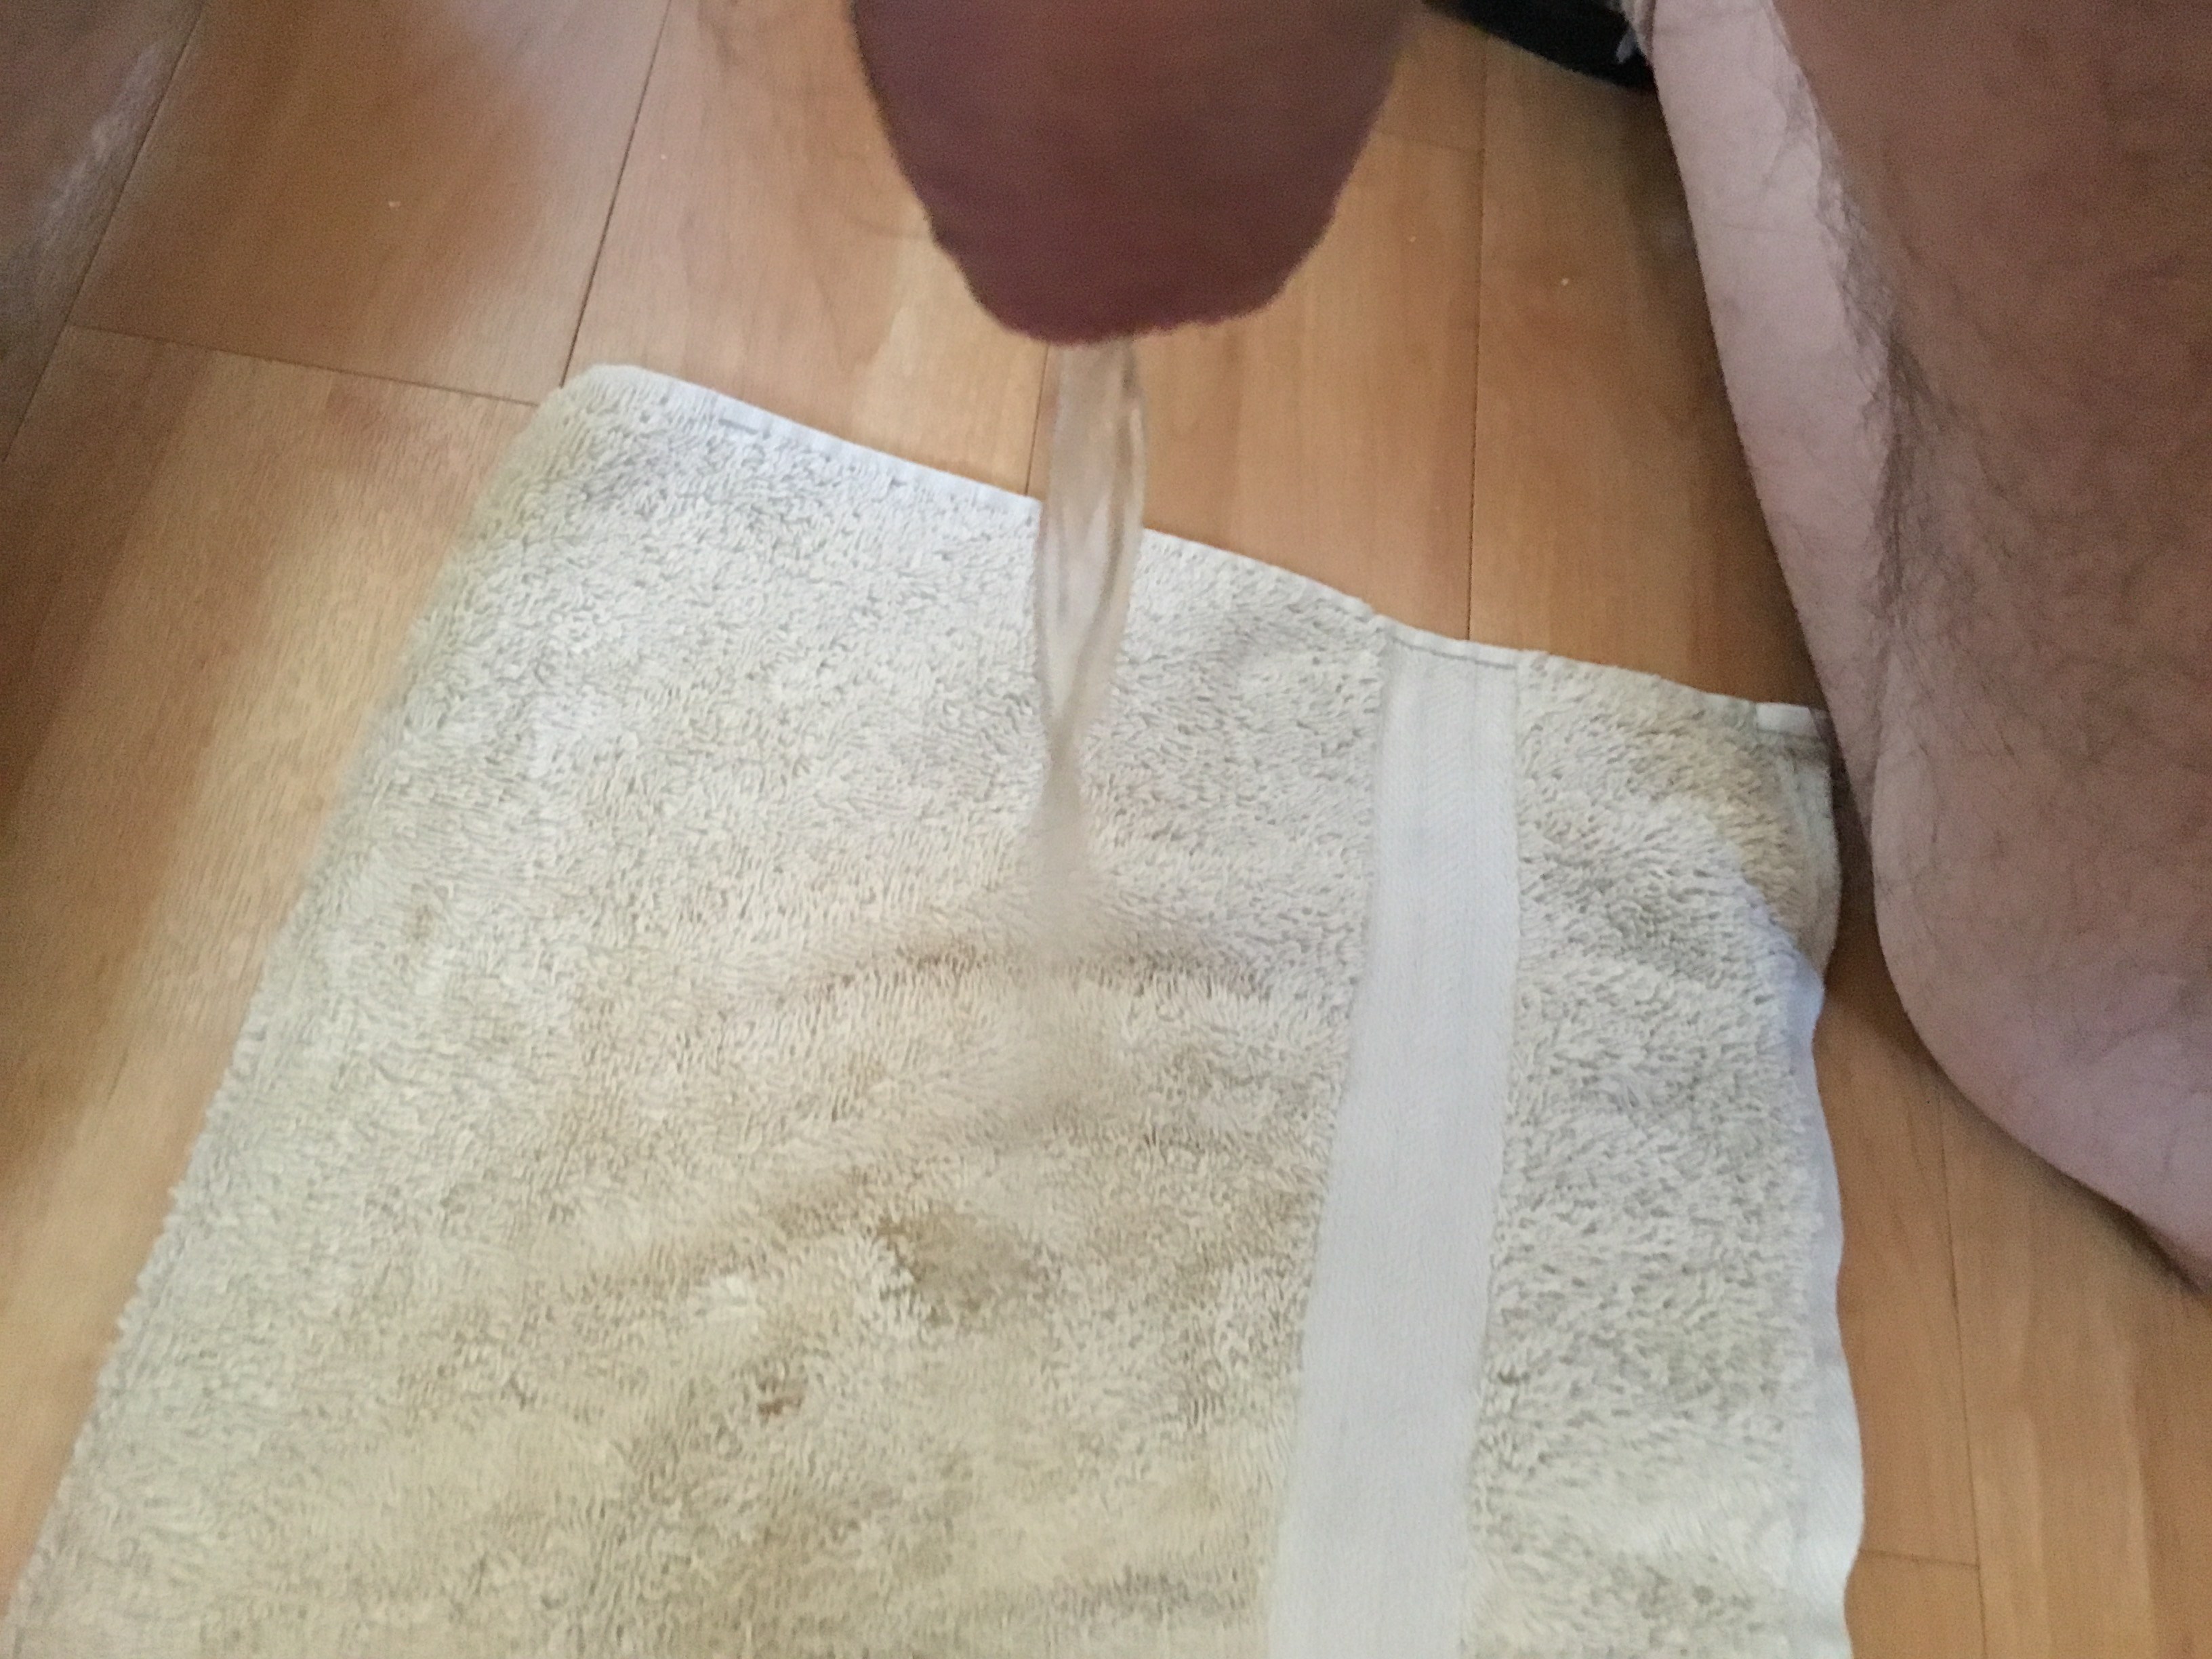 Towel Wetting - Pissing on a towel - Men Peeing: Pictures, Videos & Stories ...